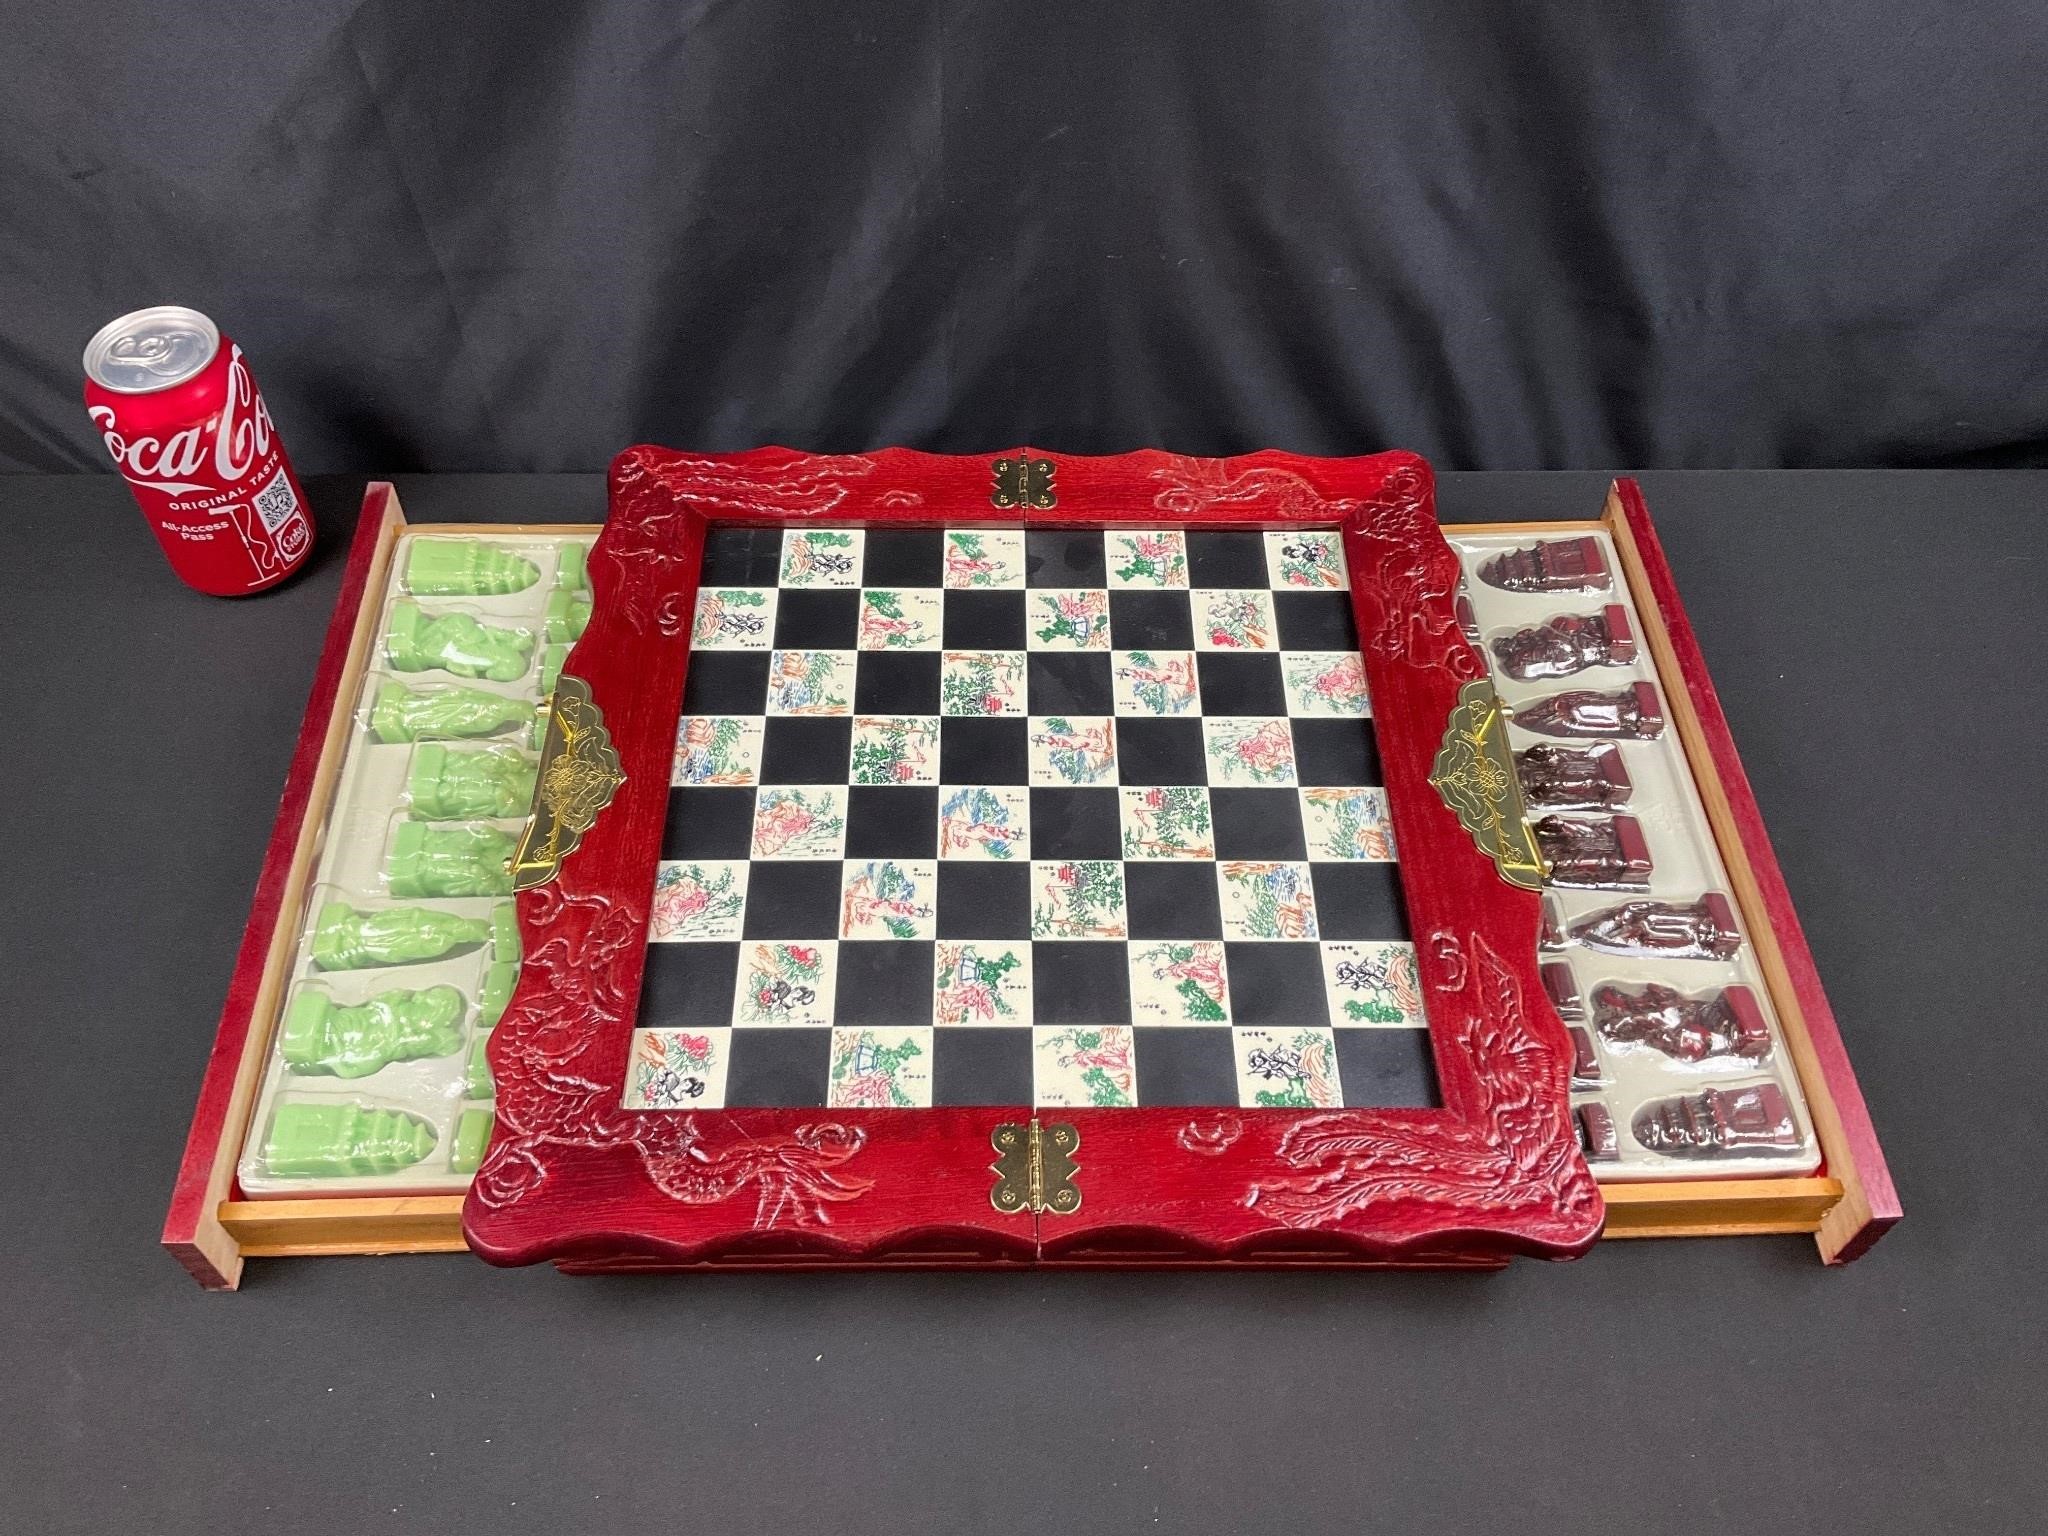 Folding Asian Inspired Chess Board & Figures